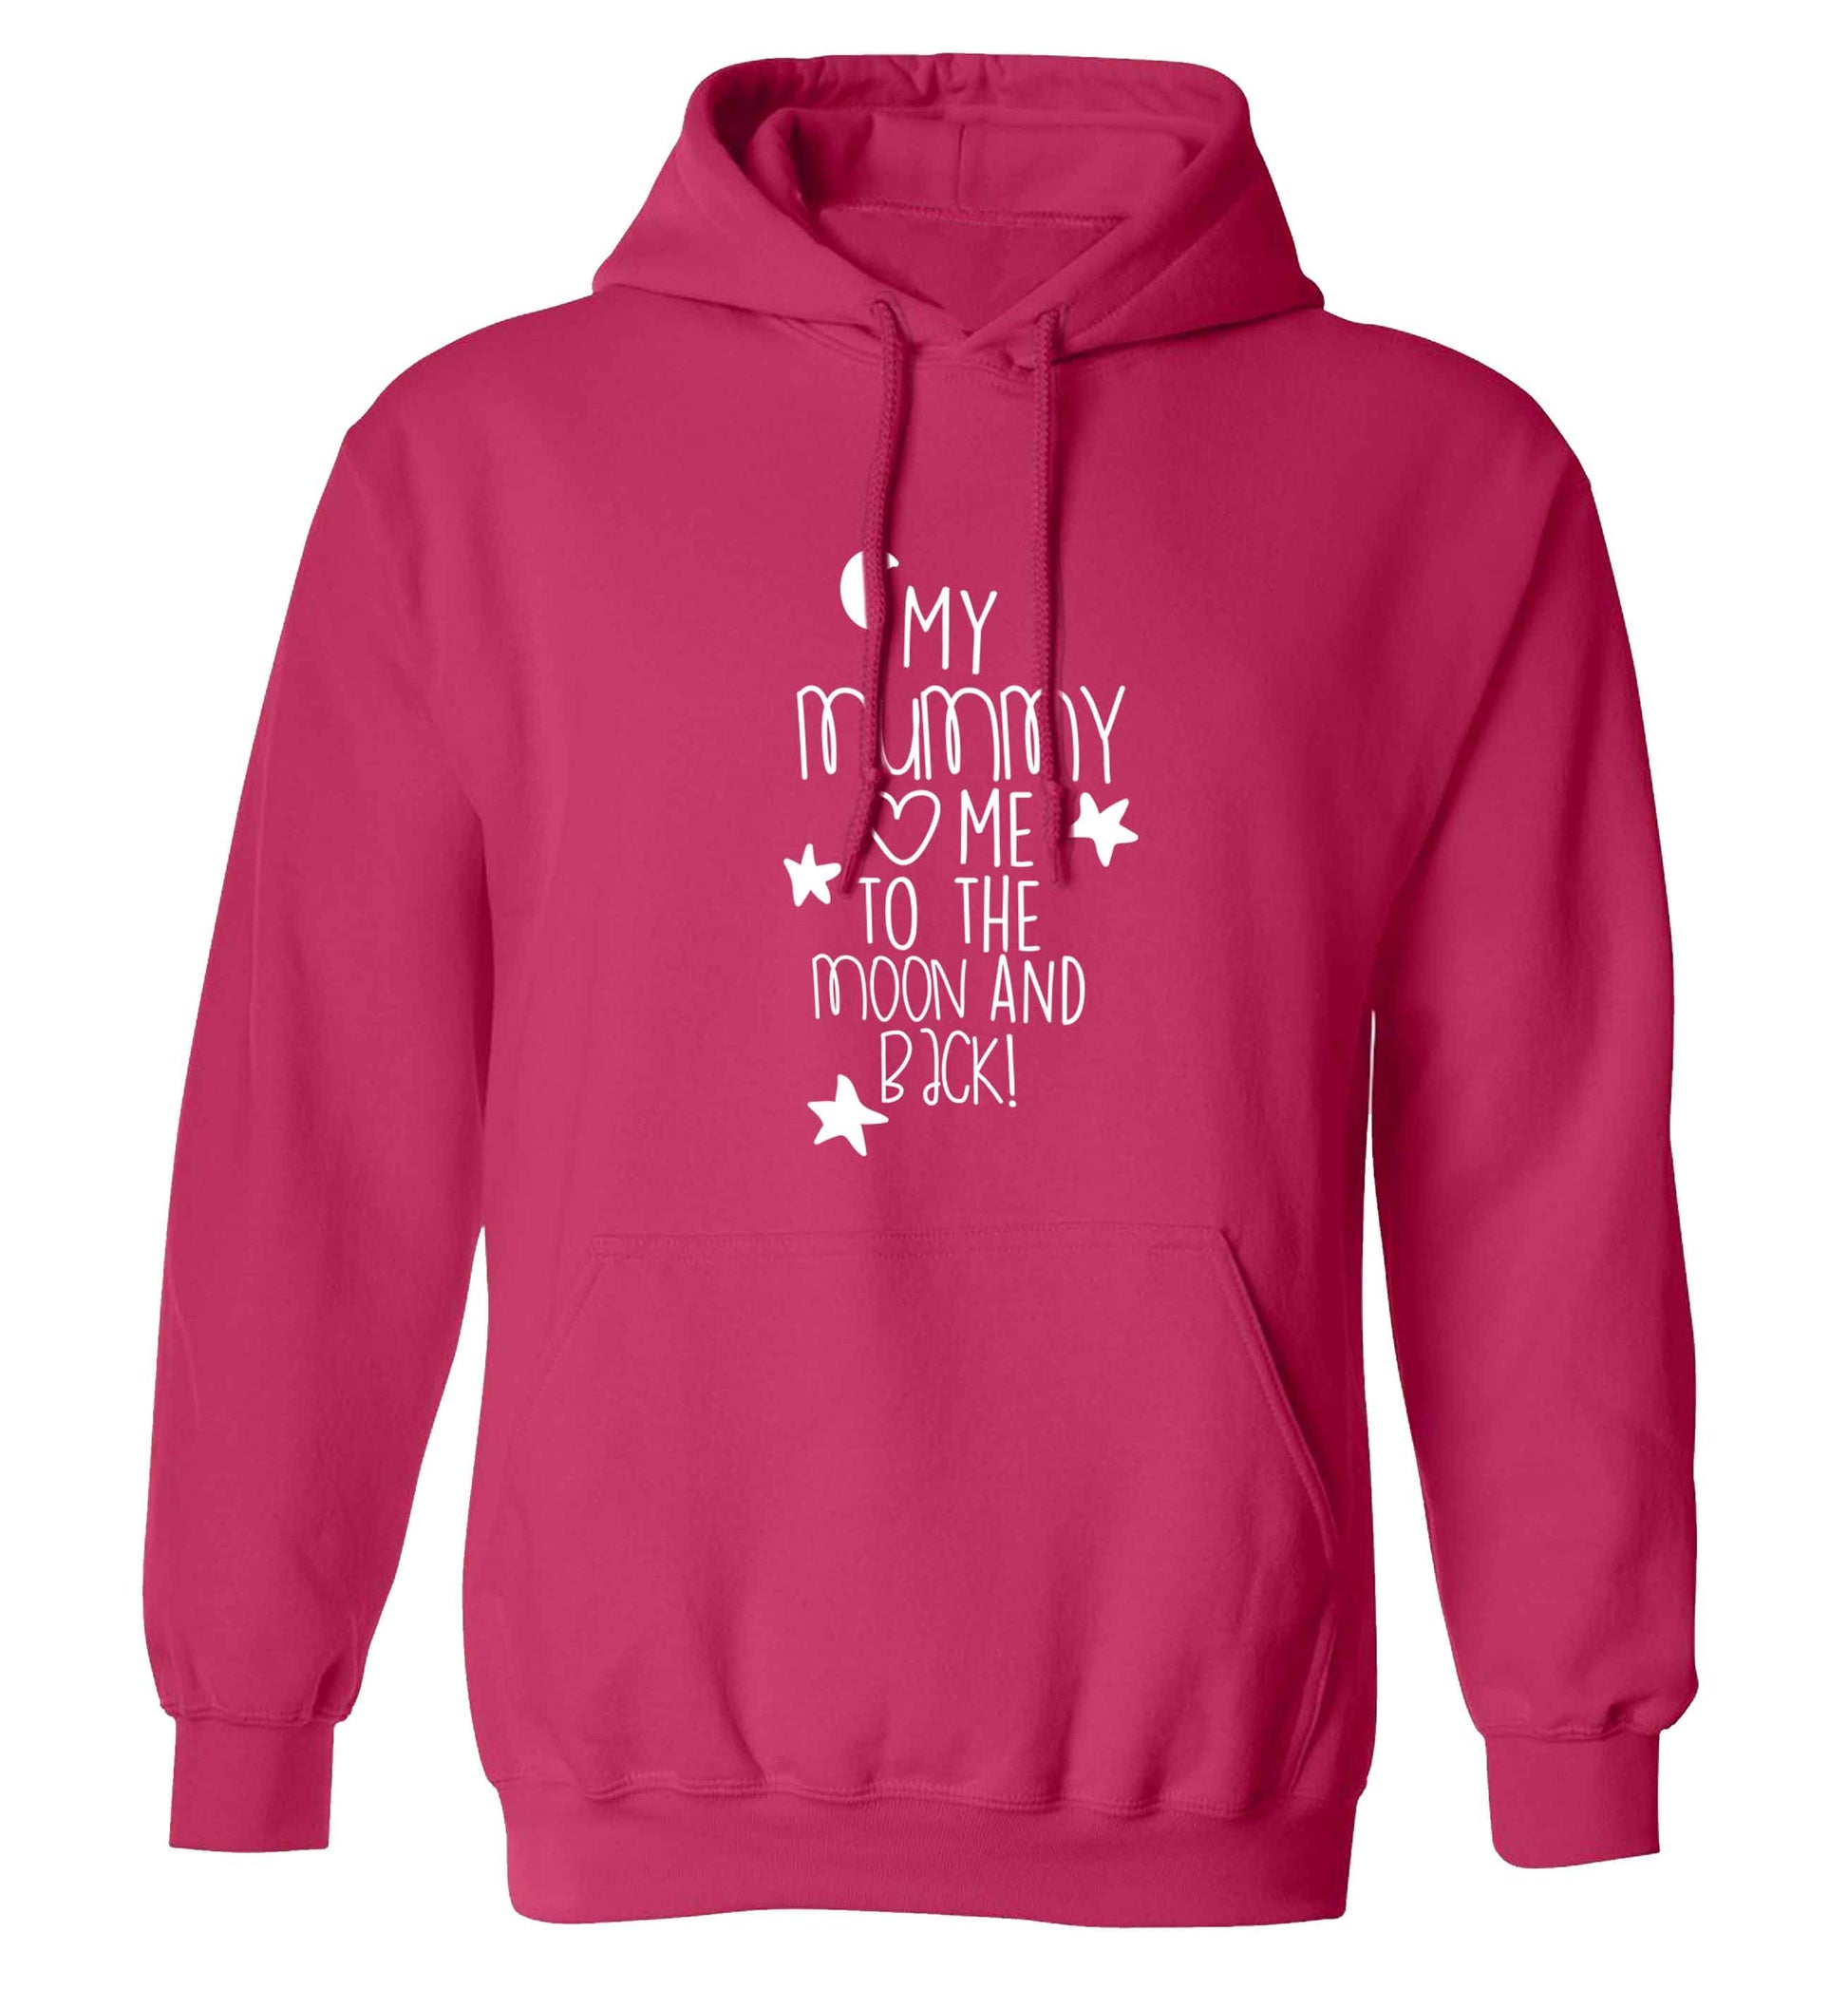 My mum loves me to the moon and back adults unisex pink hoodie 2XL